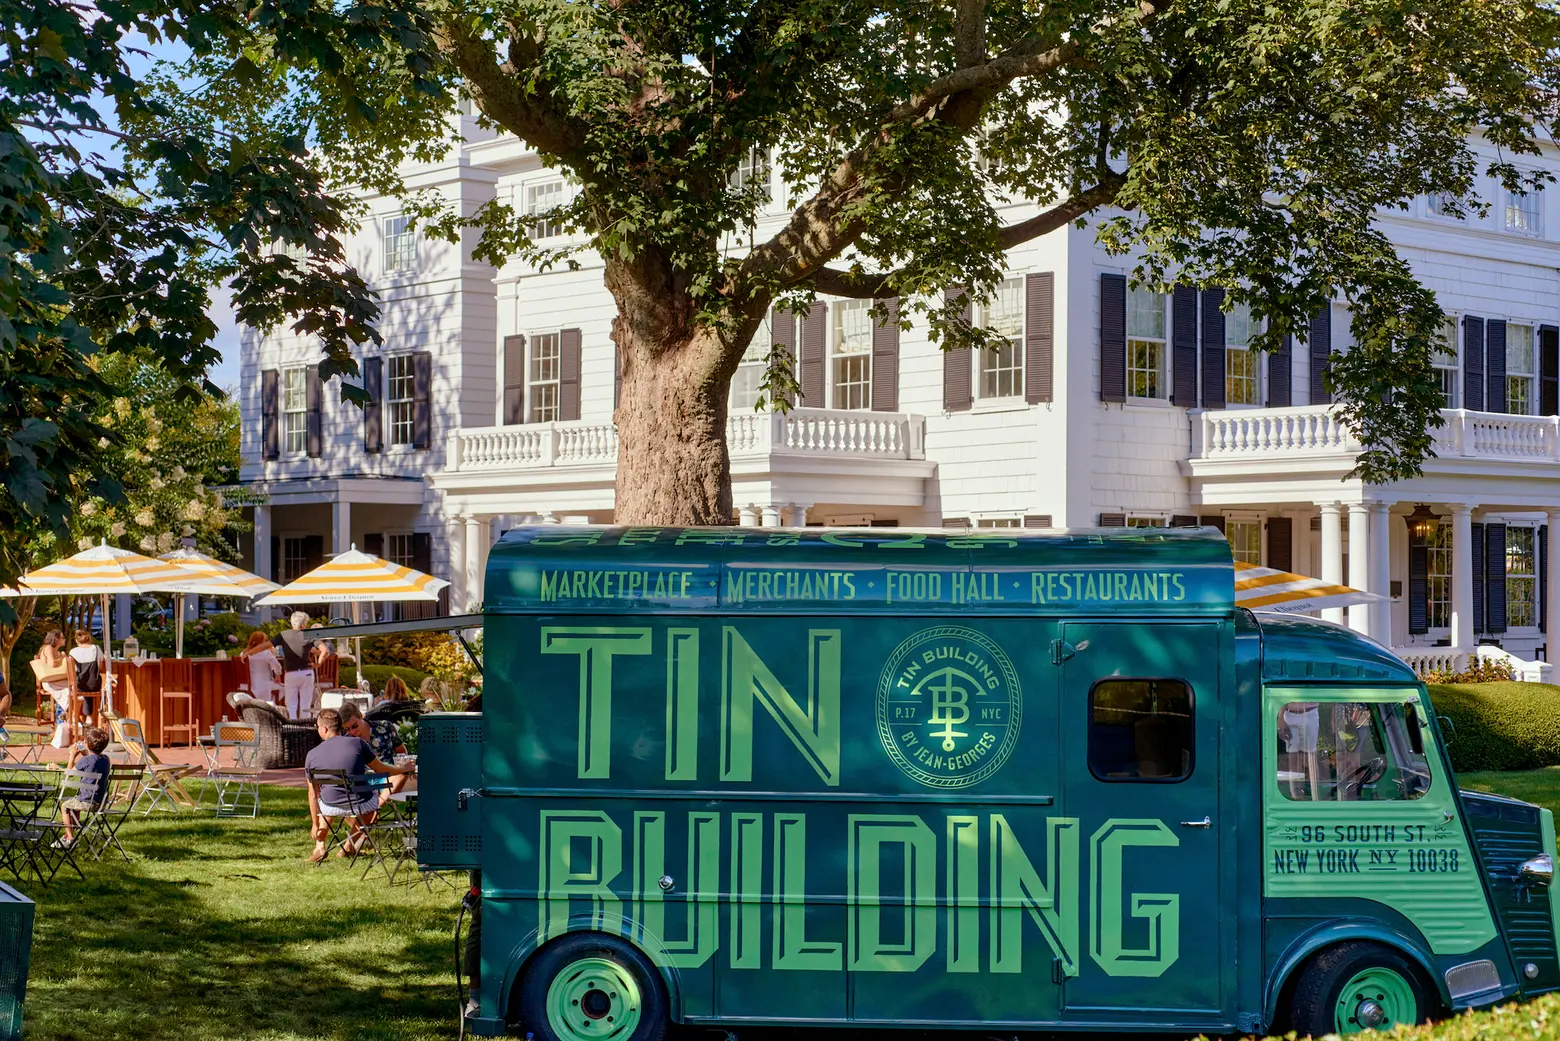 A food truck with free samples from Jean-Georges’ Tin Building is popping up across NYC